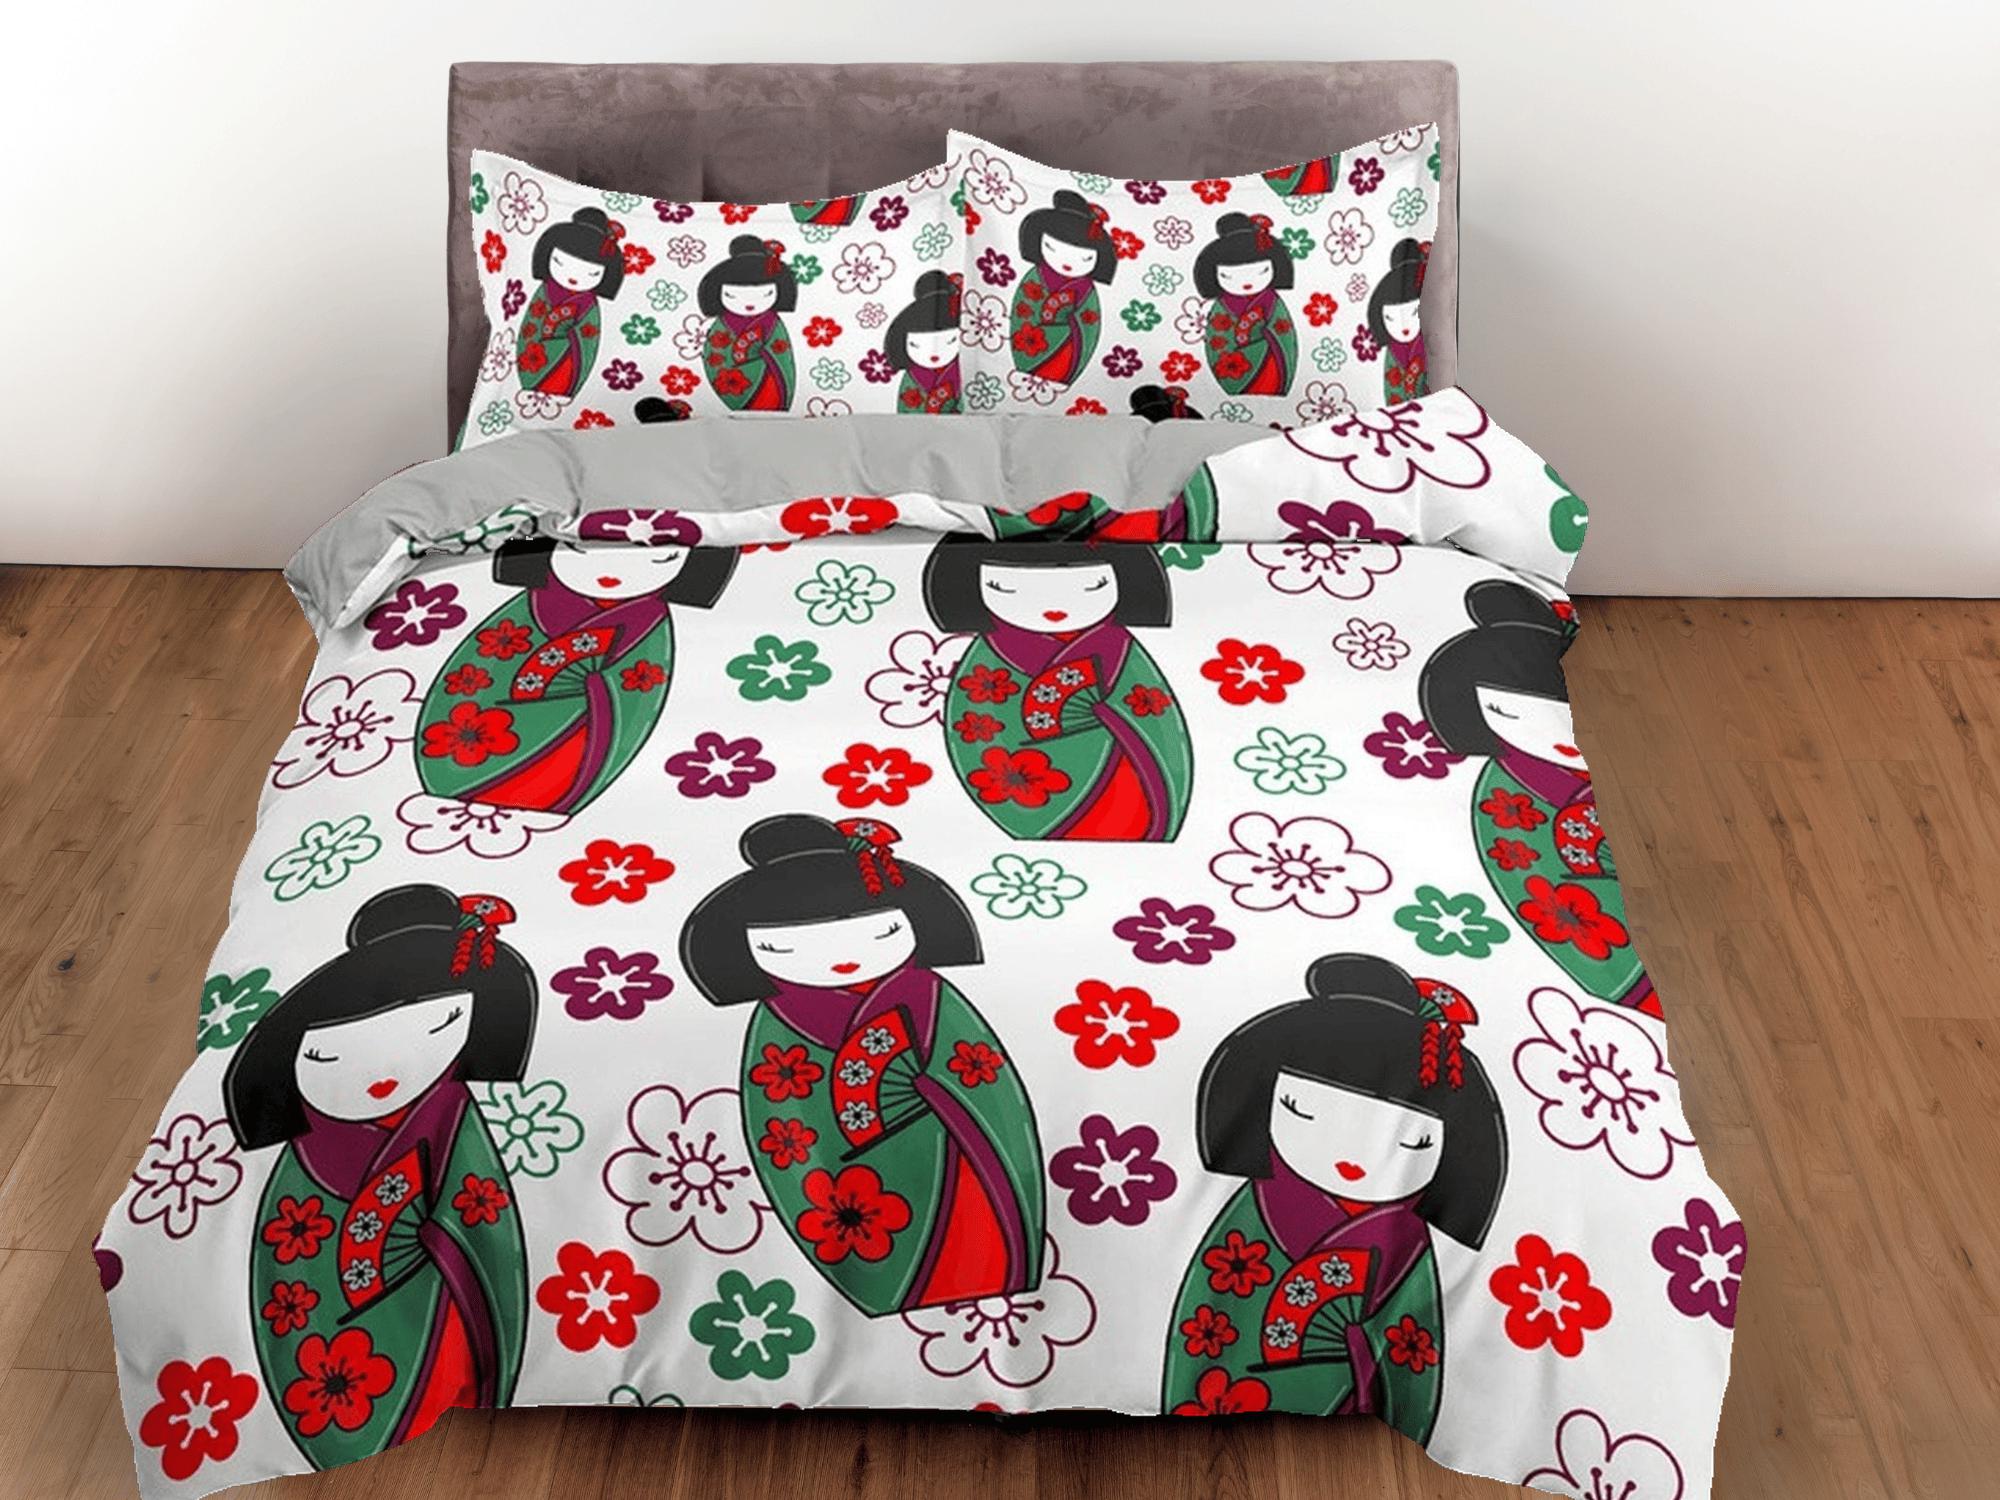 daintyduvet Cute oriental bedding, japan culture, geisha in kimono and floral prints, japanese duvet cover for king, queen, full, twin, toddler bedding